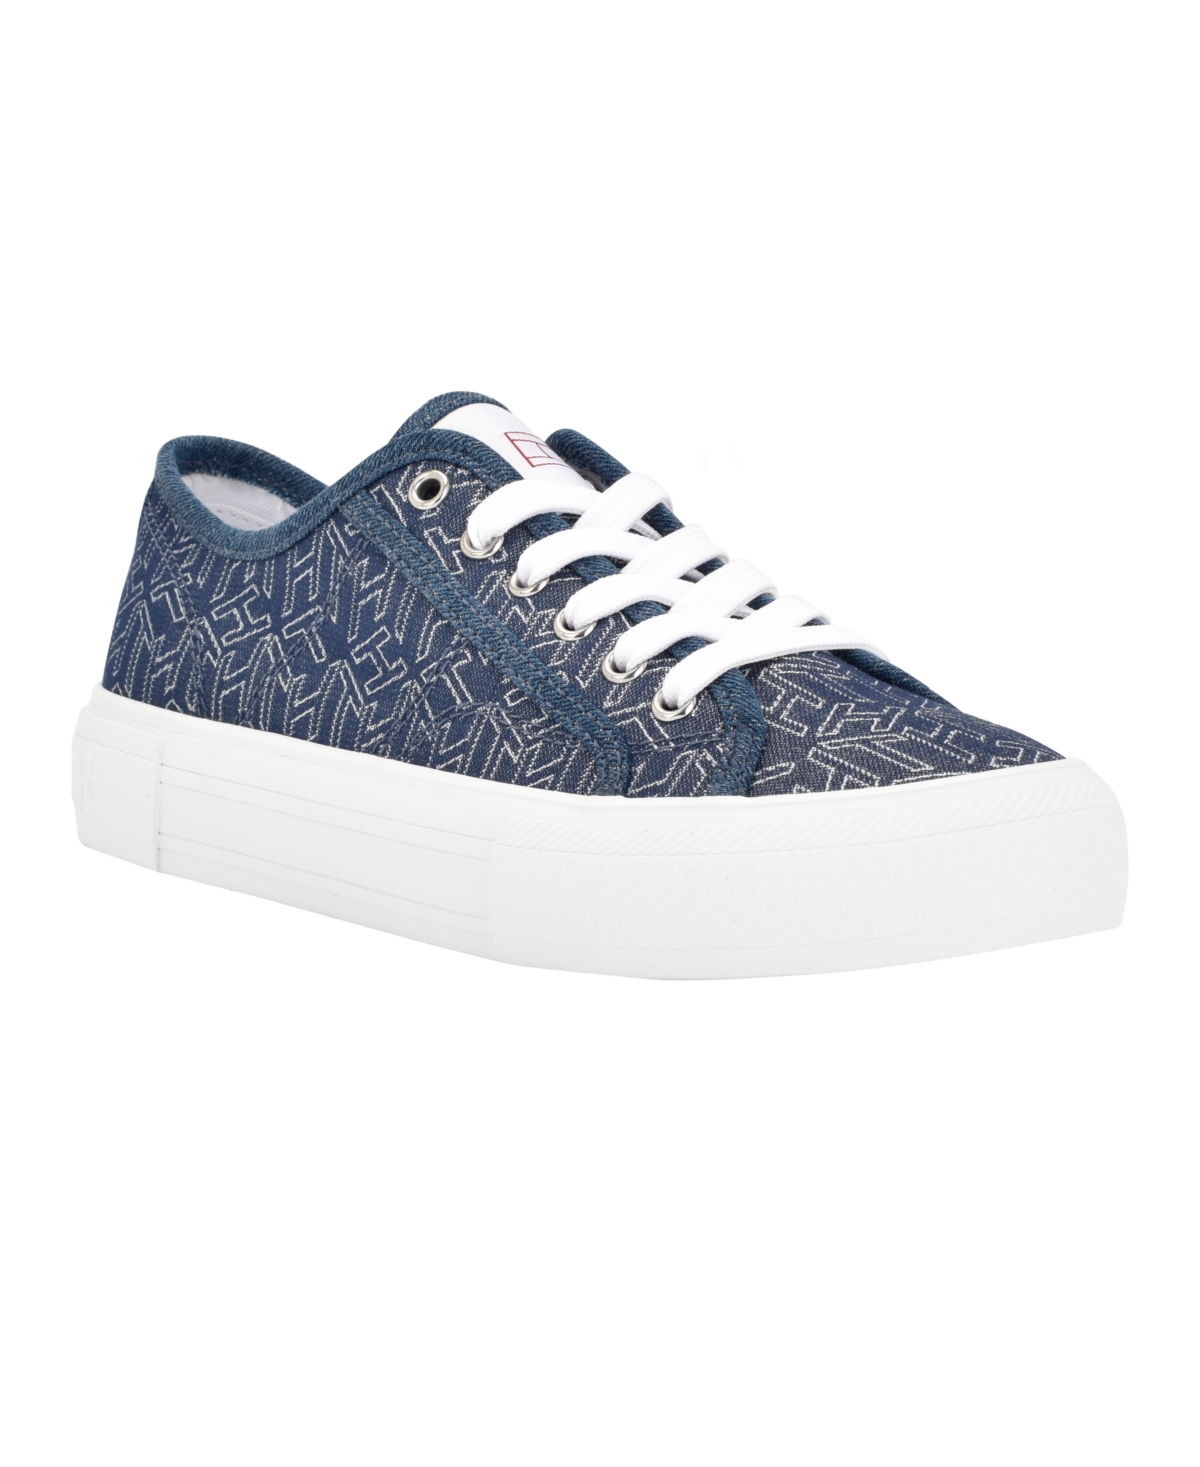 UPC 197016282923 product image for Tommy Hilfiger Women's Alessy Casual Lace Up Sneakers Women's Shoes | upcitemdb.com